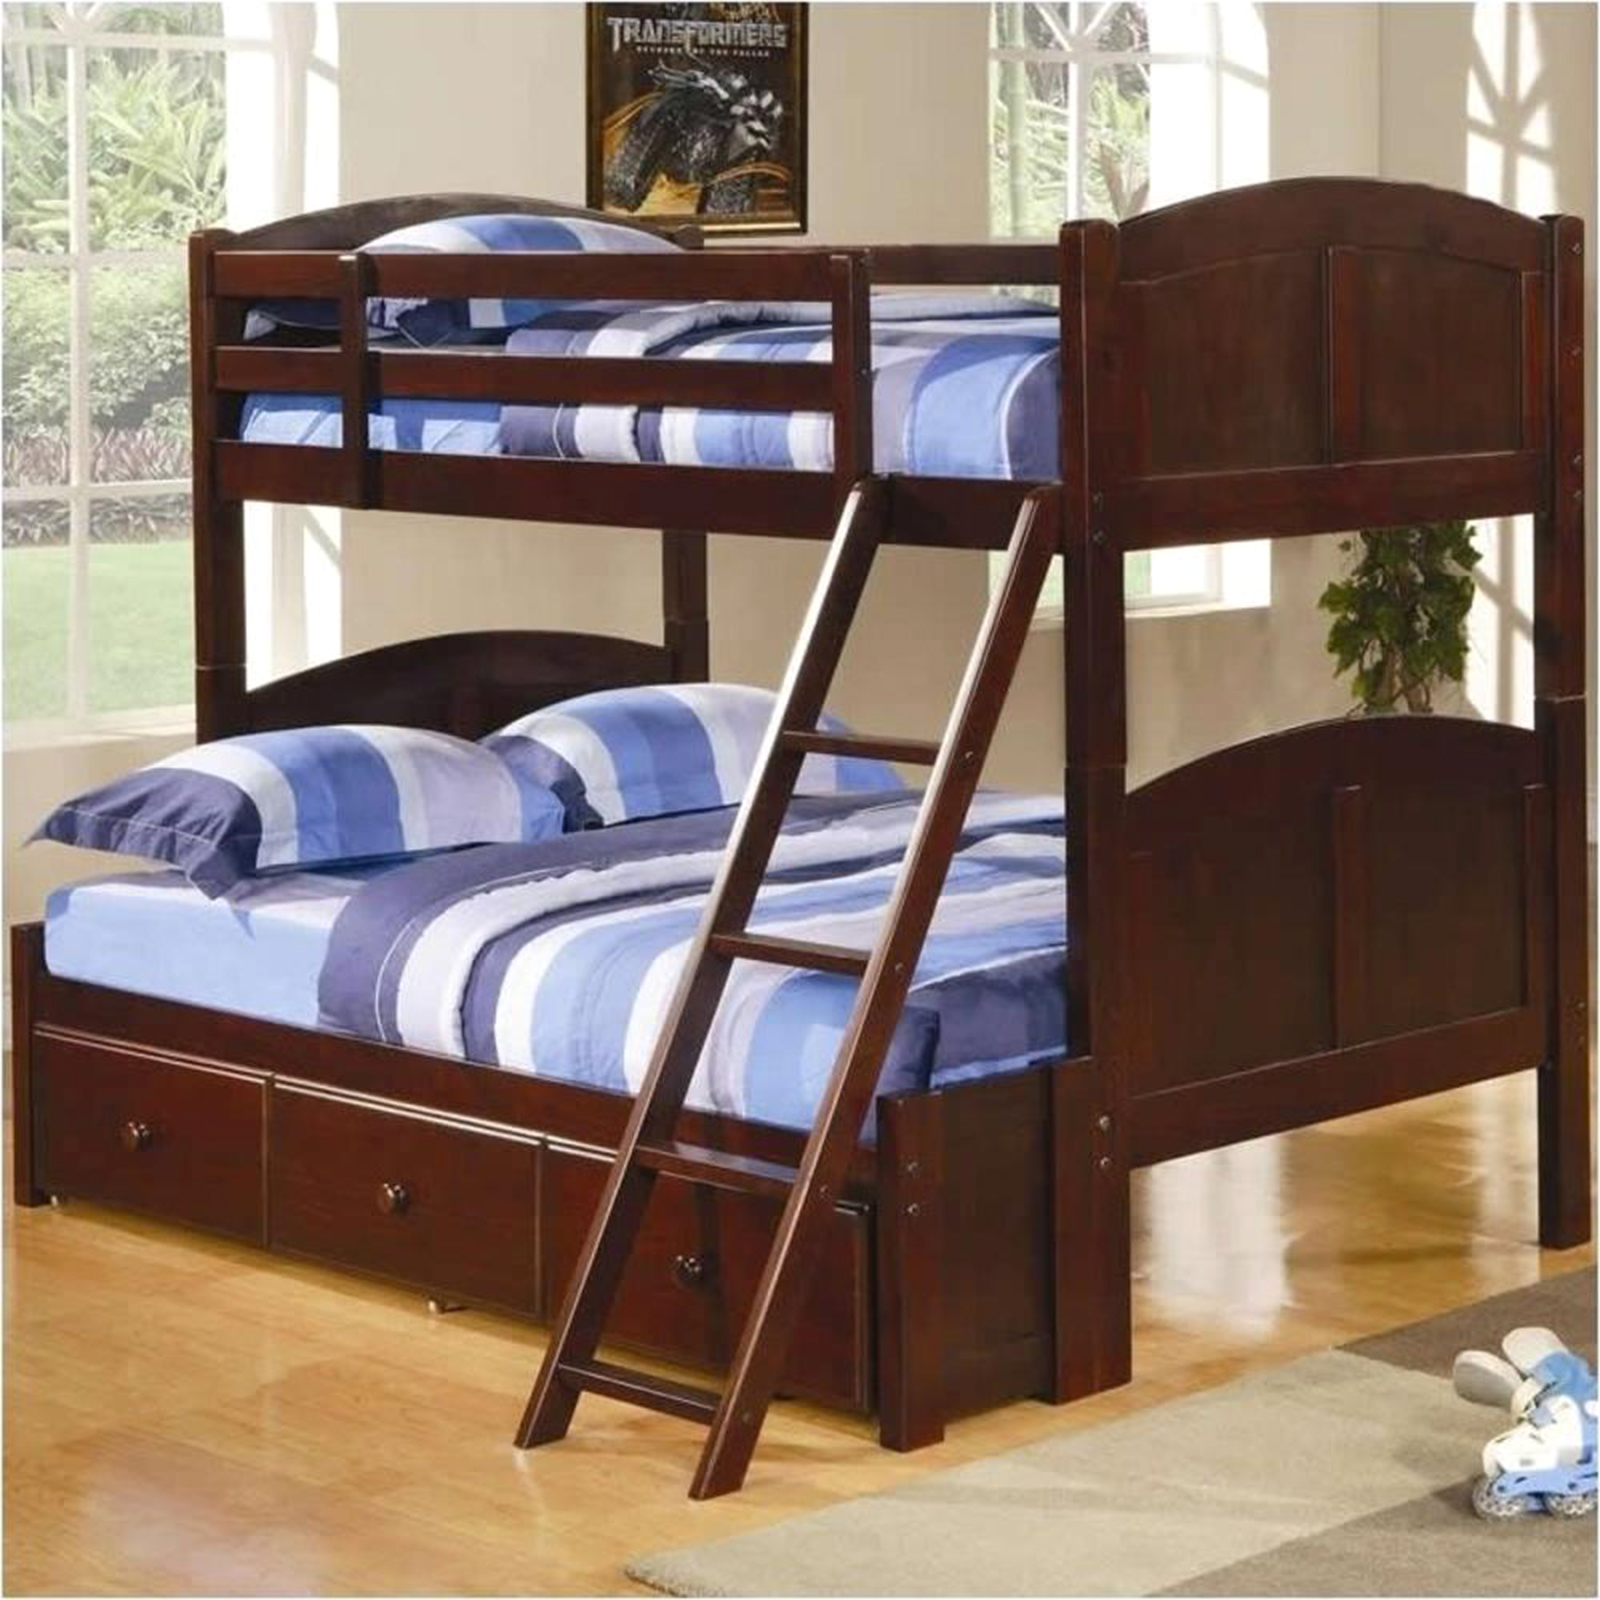 Bowery Hill Twin over Full Bunk Bed with Ladder - Cappuccino